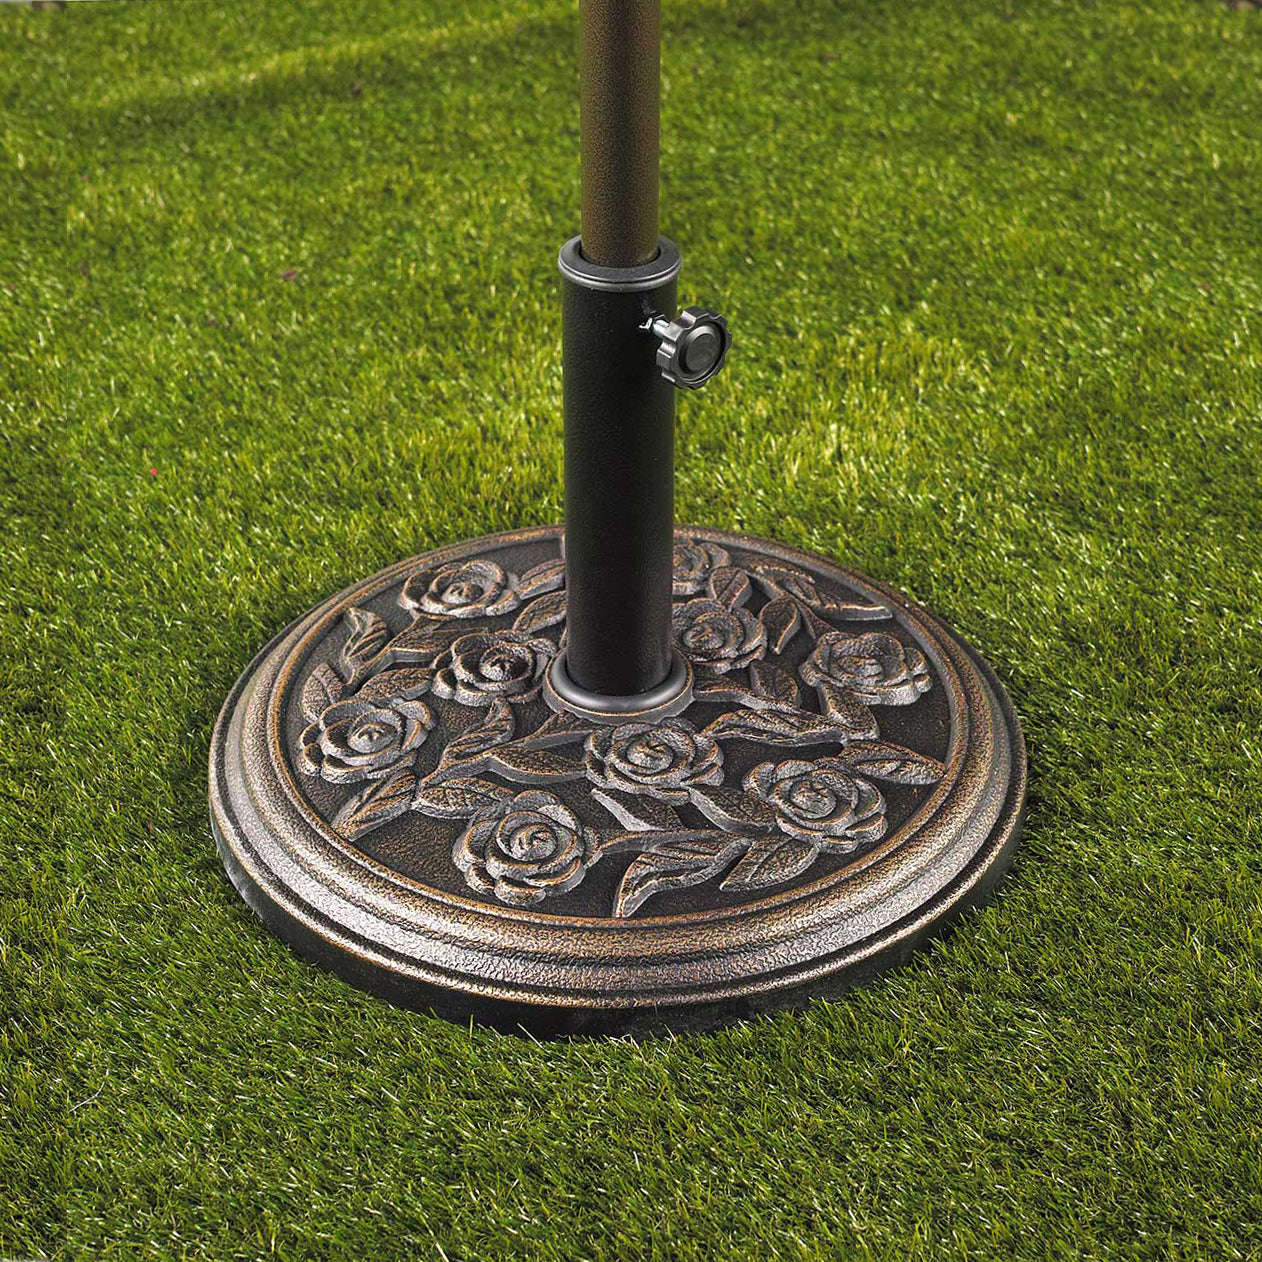 Bliss Outdoors Heavy-Duty Umbrella Base in the rose variation in grass with an umbrella inside.